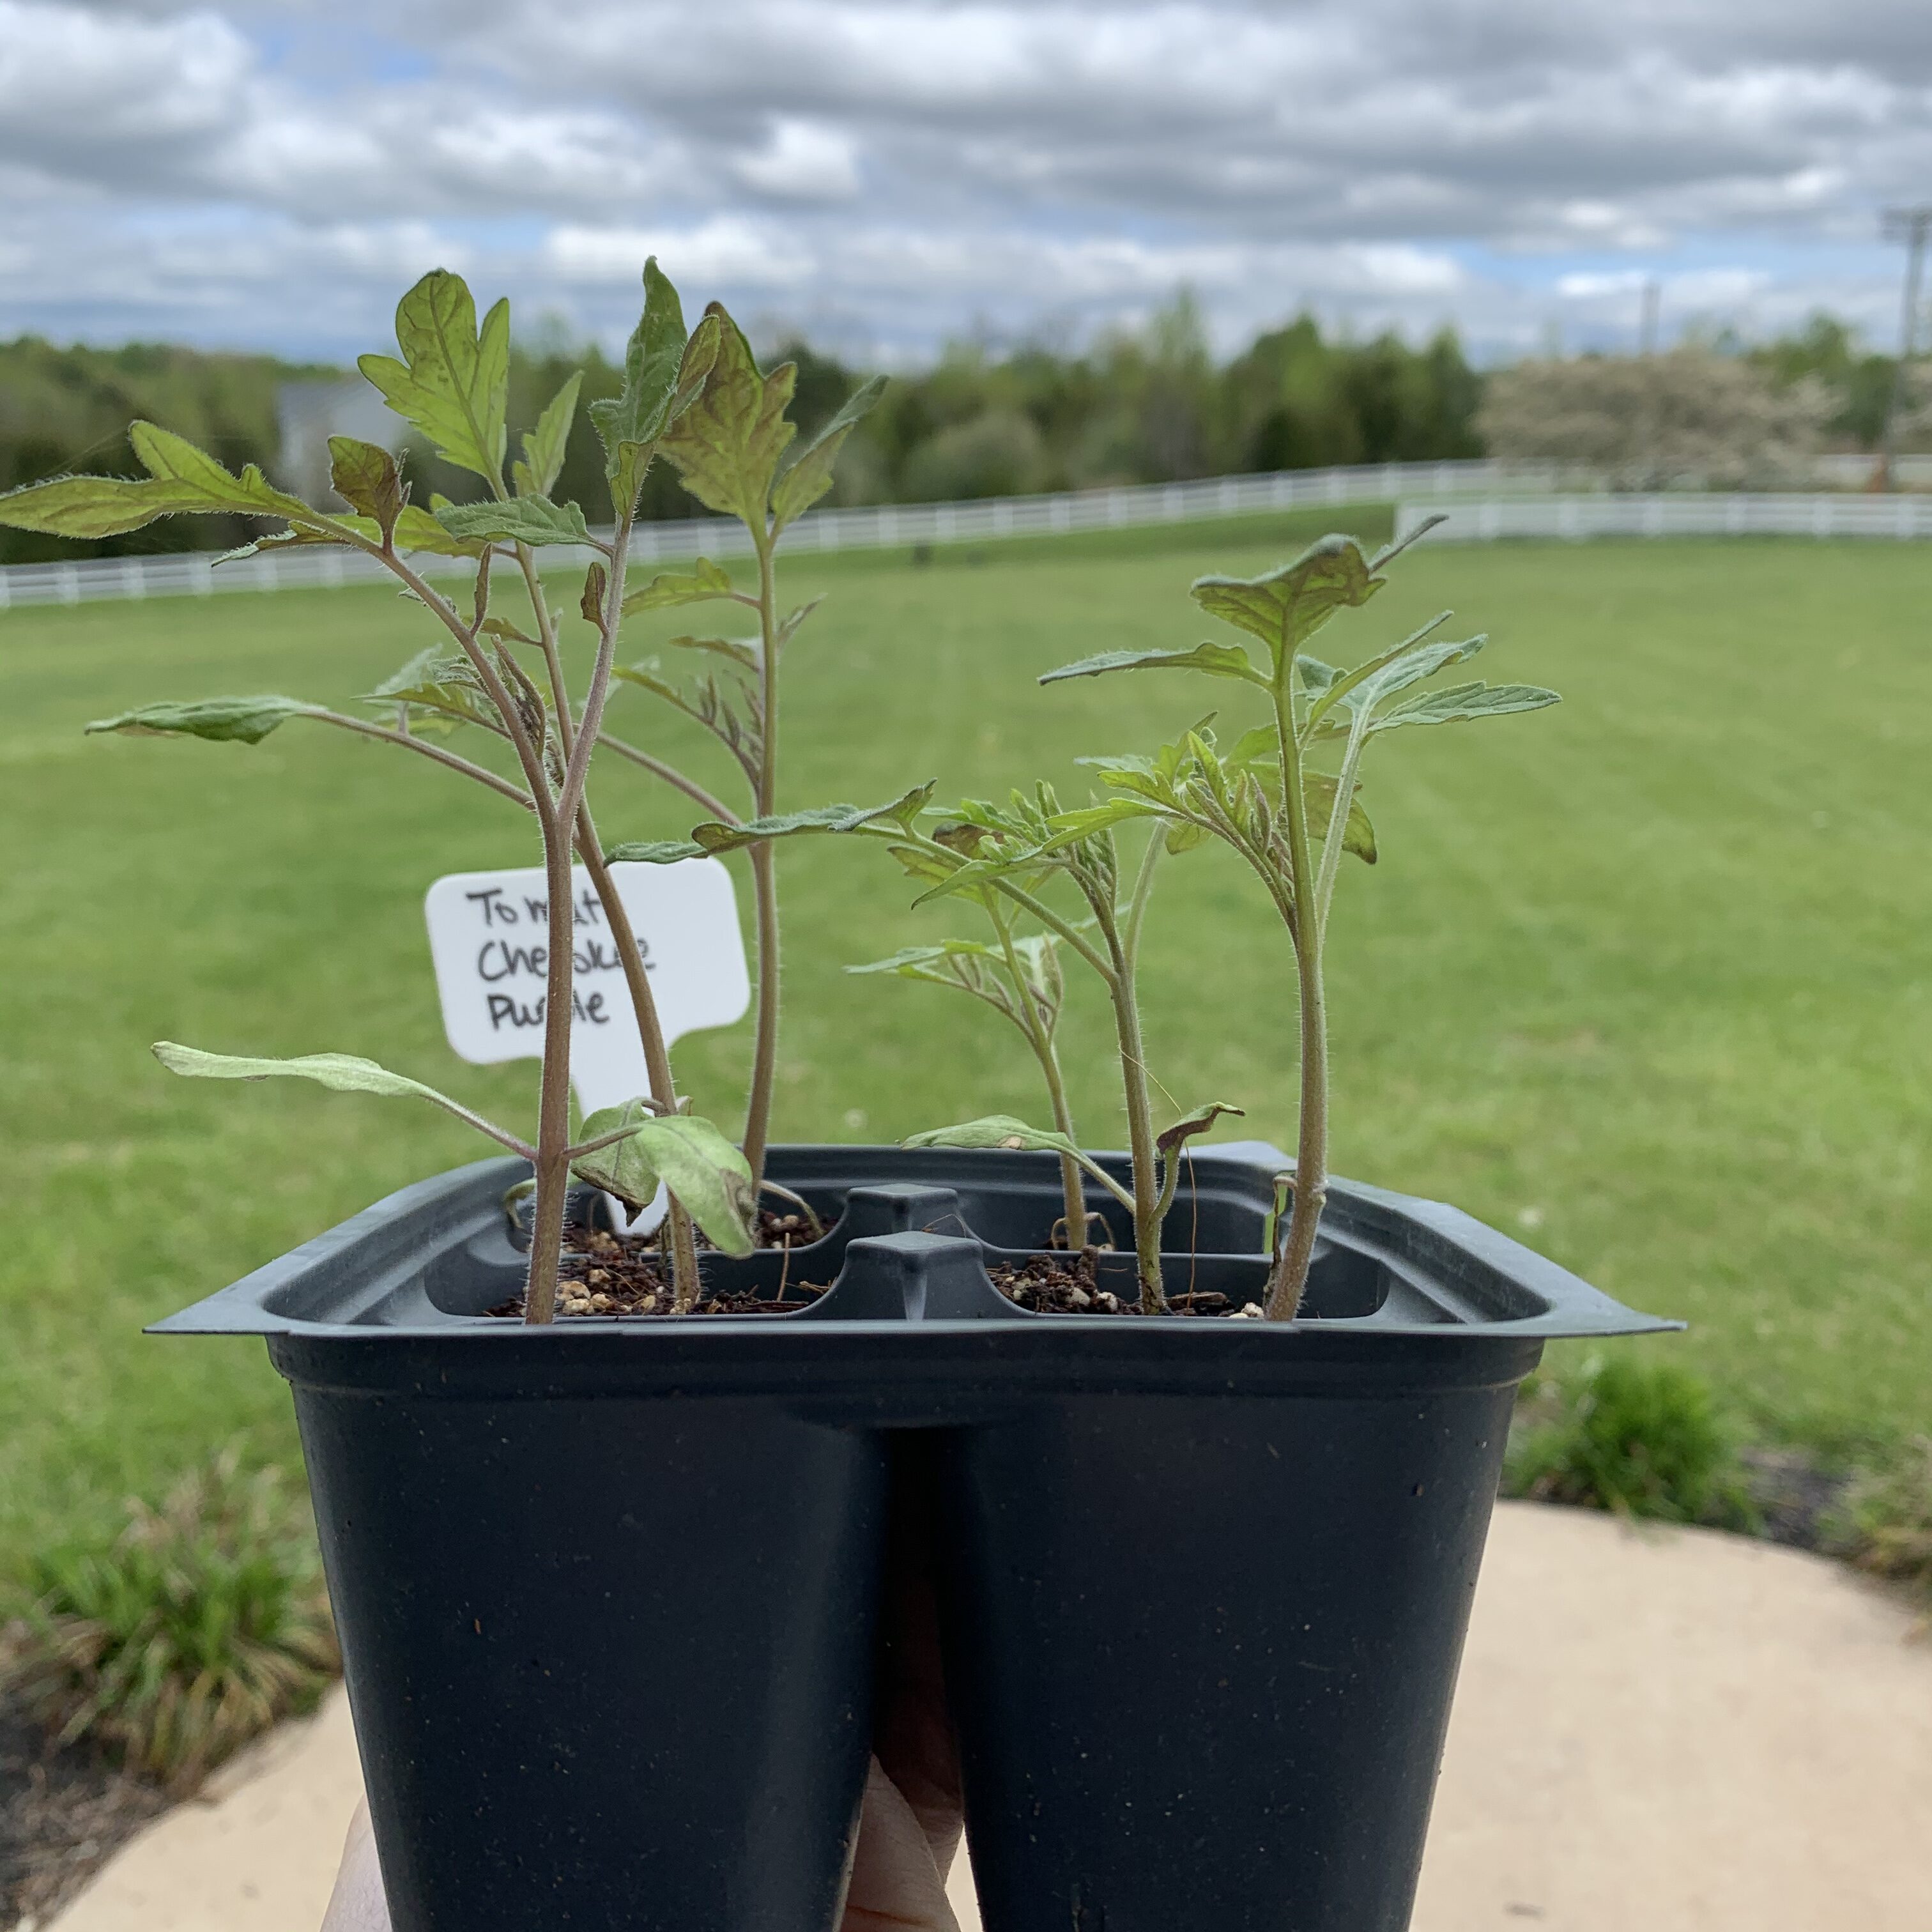 D8E2965A B8AA 4784 A3DF 5231F0F7031C Comparing Burpee Organic Seed Starting Mix vs Miracle Gro Moisture Control Potting Mix for transplanted tomato seedlings - Results